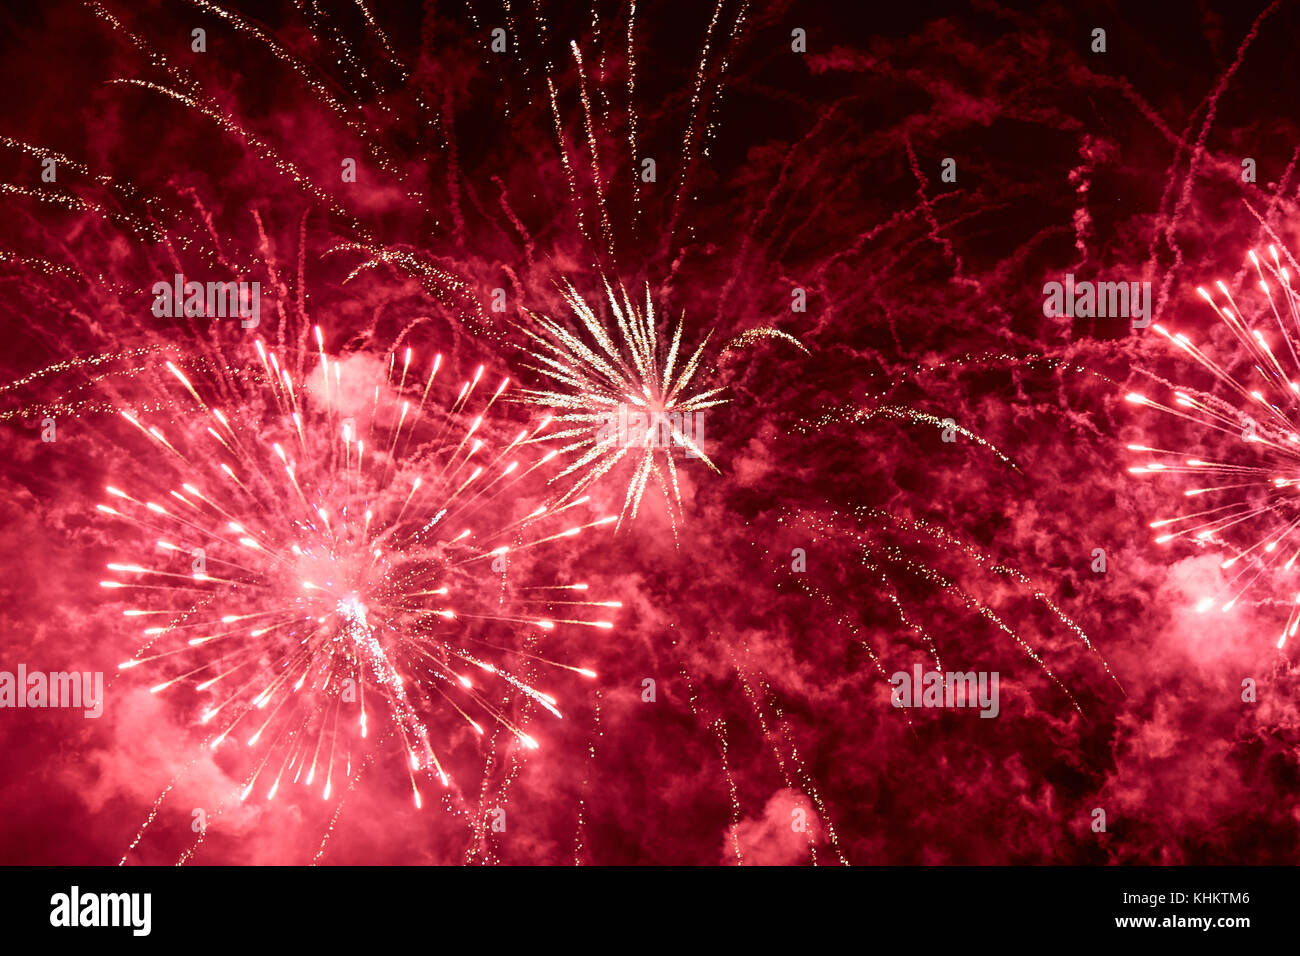 Explosions of red fireworks on the background on a dark night sky Stock Photo